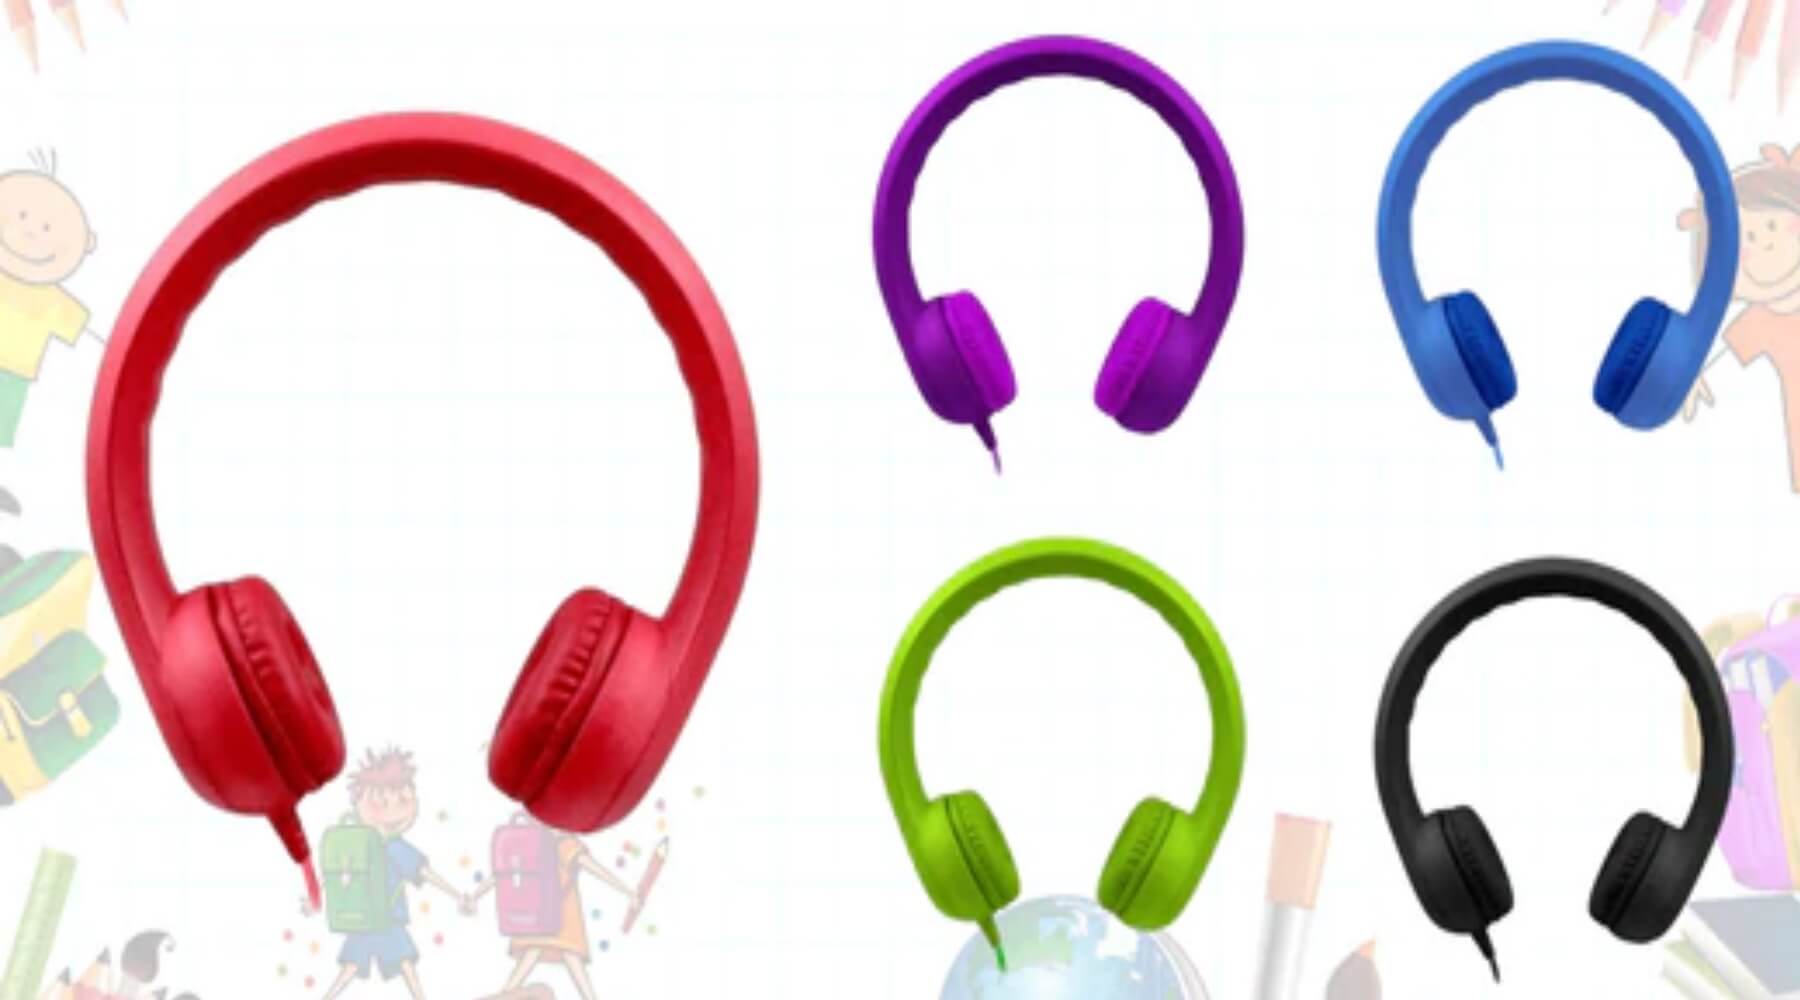 Flex-Phones™ School Headphones for Students – the most comfortable headphones for kids & teens. Hear clearly with rich sound, in style and with safety!